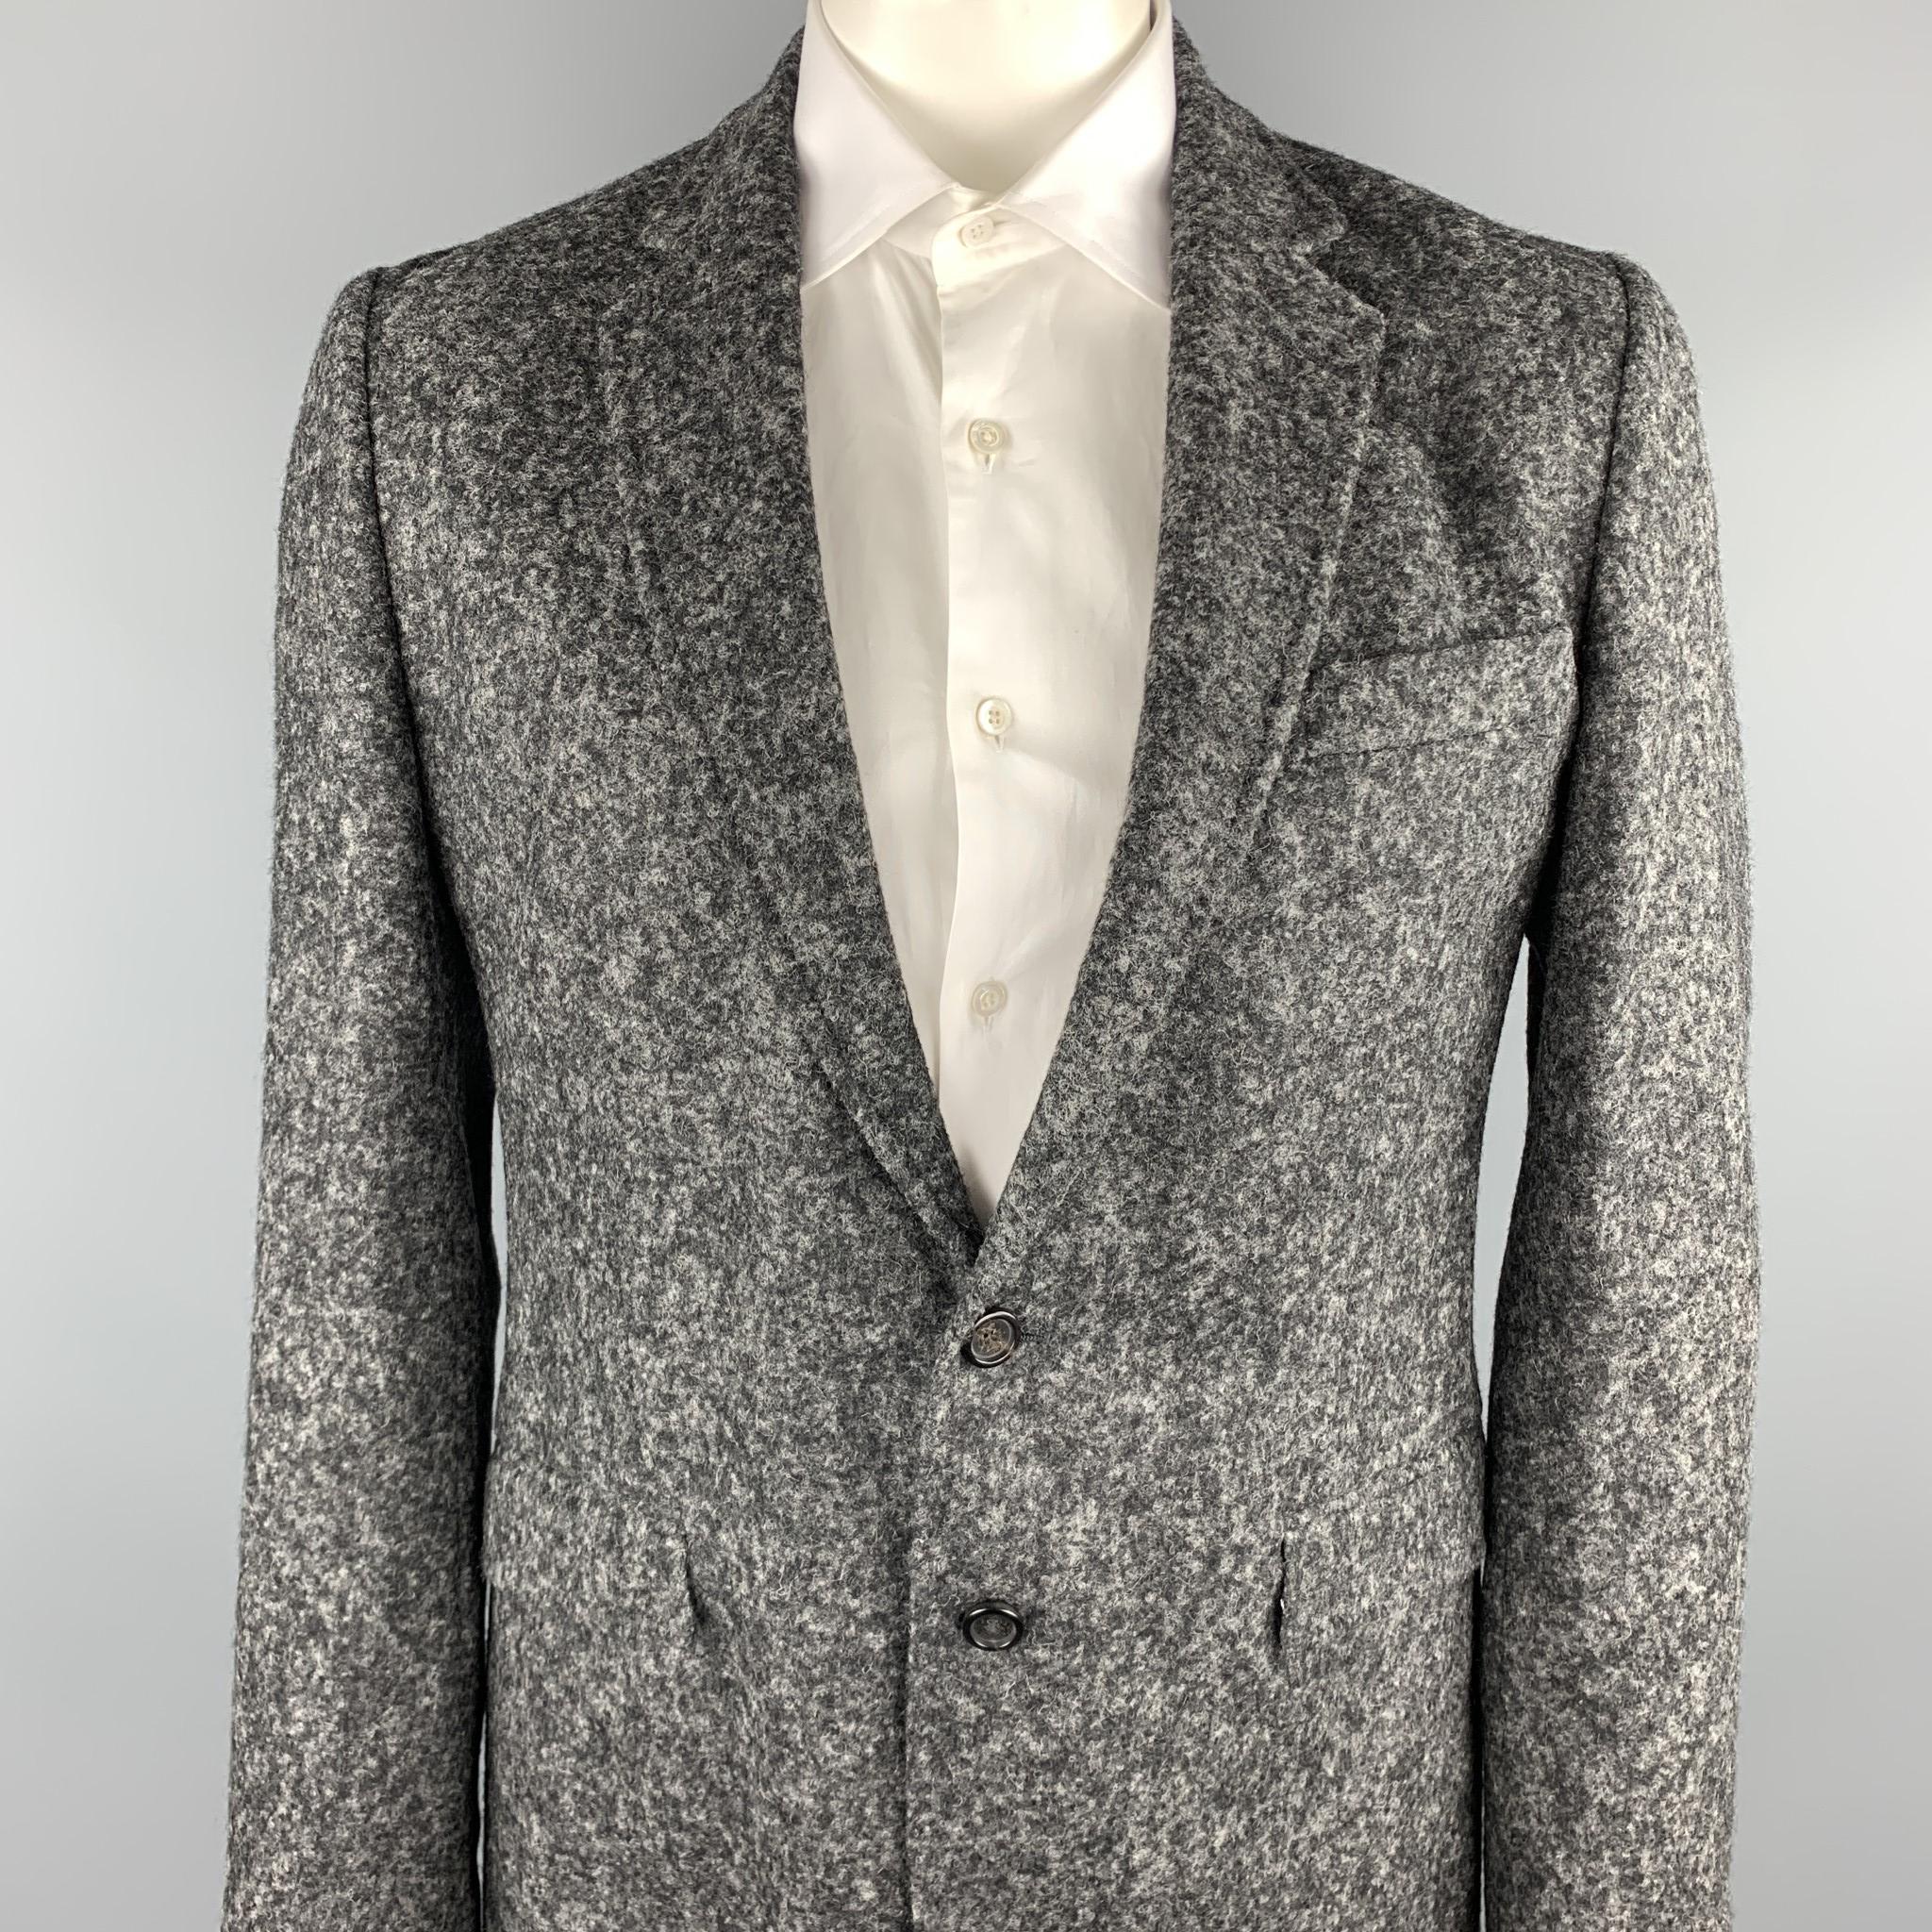 DOLCE & GABBANA sport coat comes in a gray heather alpaca / nylon featuring a notch lapel, flap pocket, and a two button closure. Made in Italy.

Excellent Pre-Owned Condition.
Marked: IT 50 

Measurements:

Shoulder: 18 in. 
Chest: 40 in. 
Sleeve: